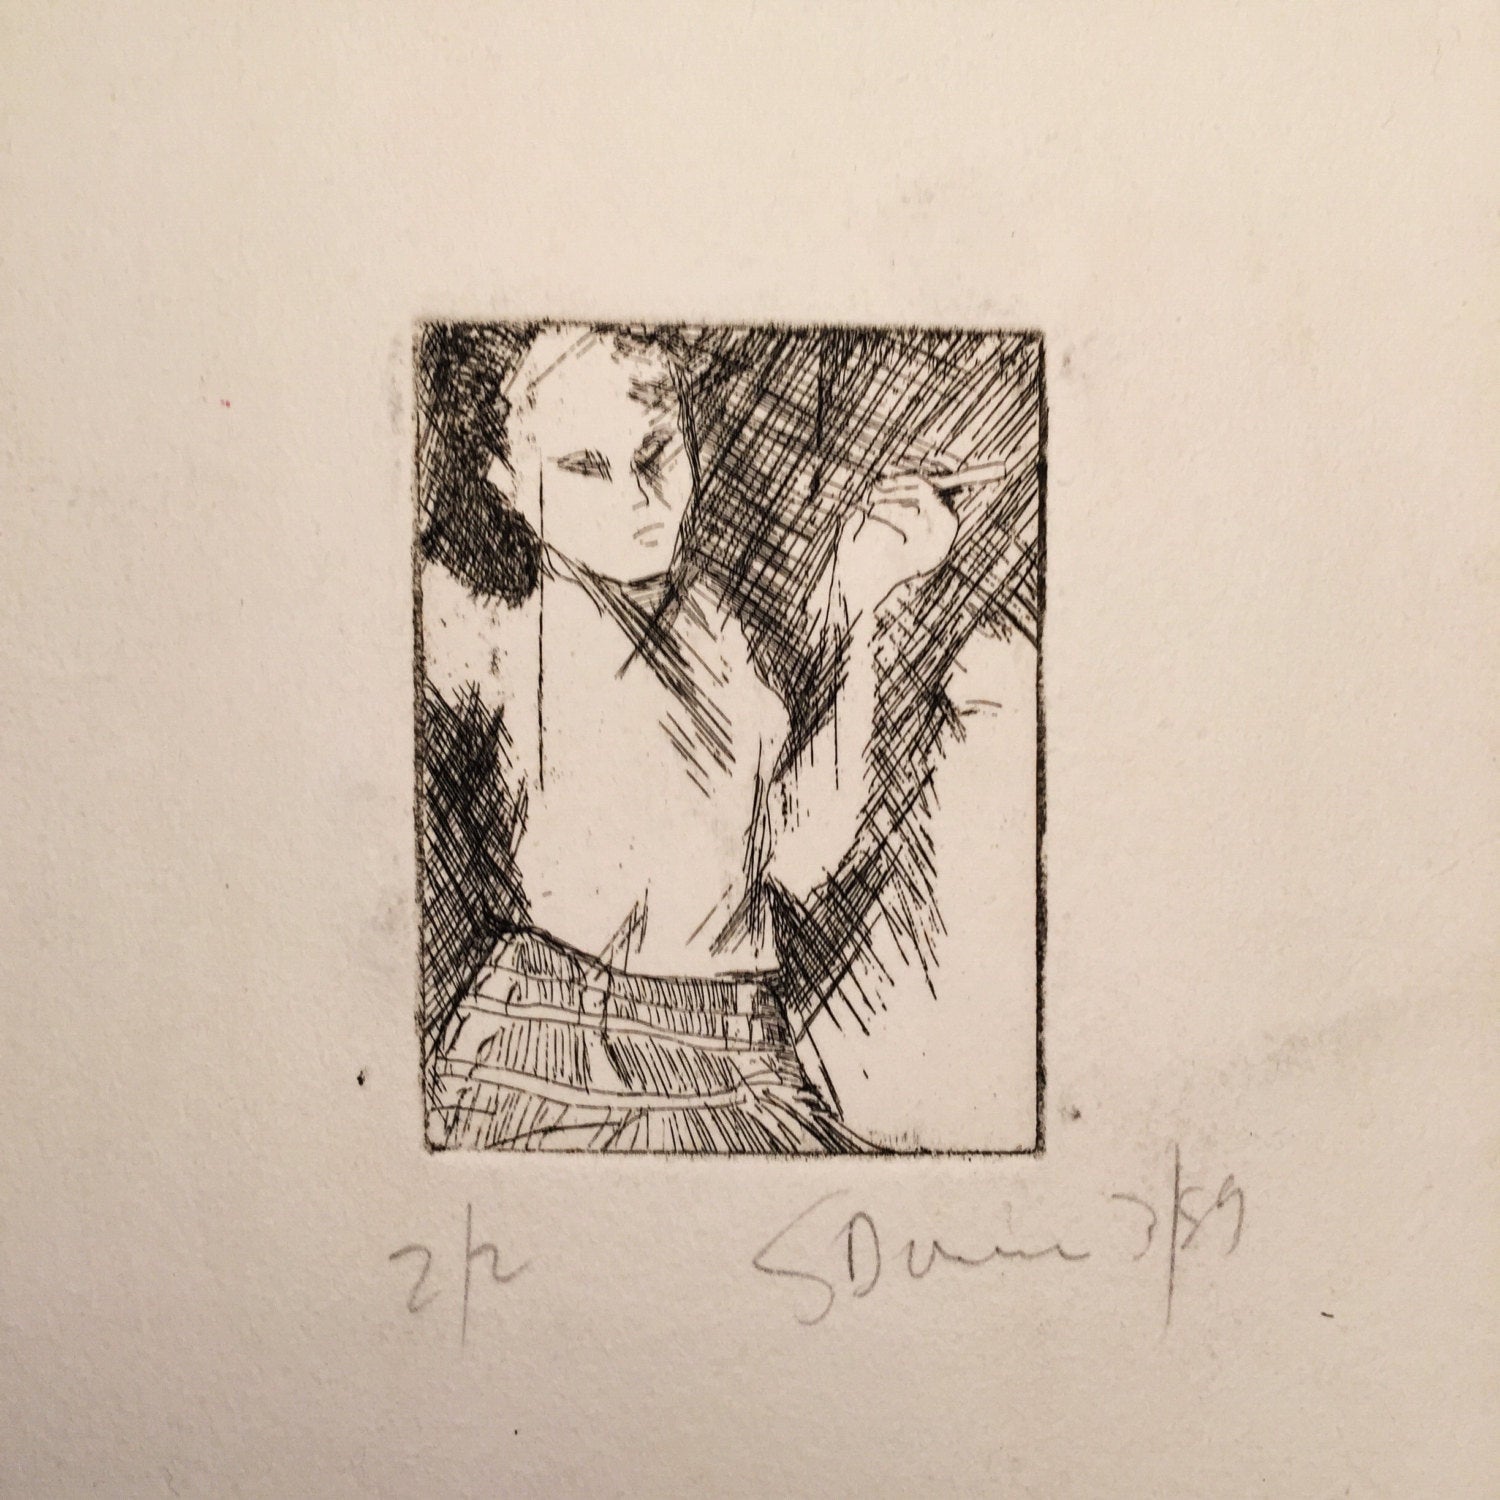 Vintage Modernist Etching of Figure with Cigarette - Signed - Mystery Artist - 1959 - 2 of 2